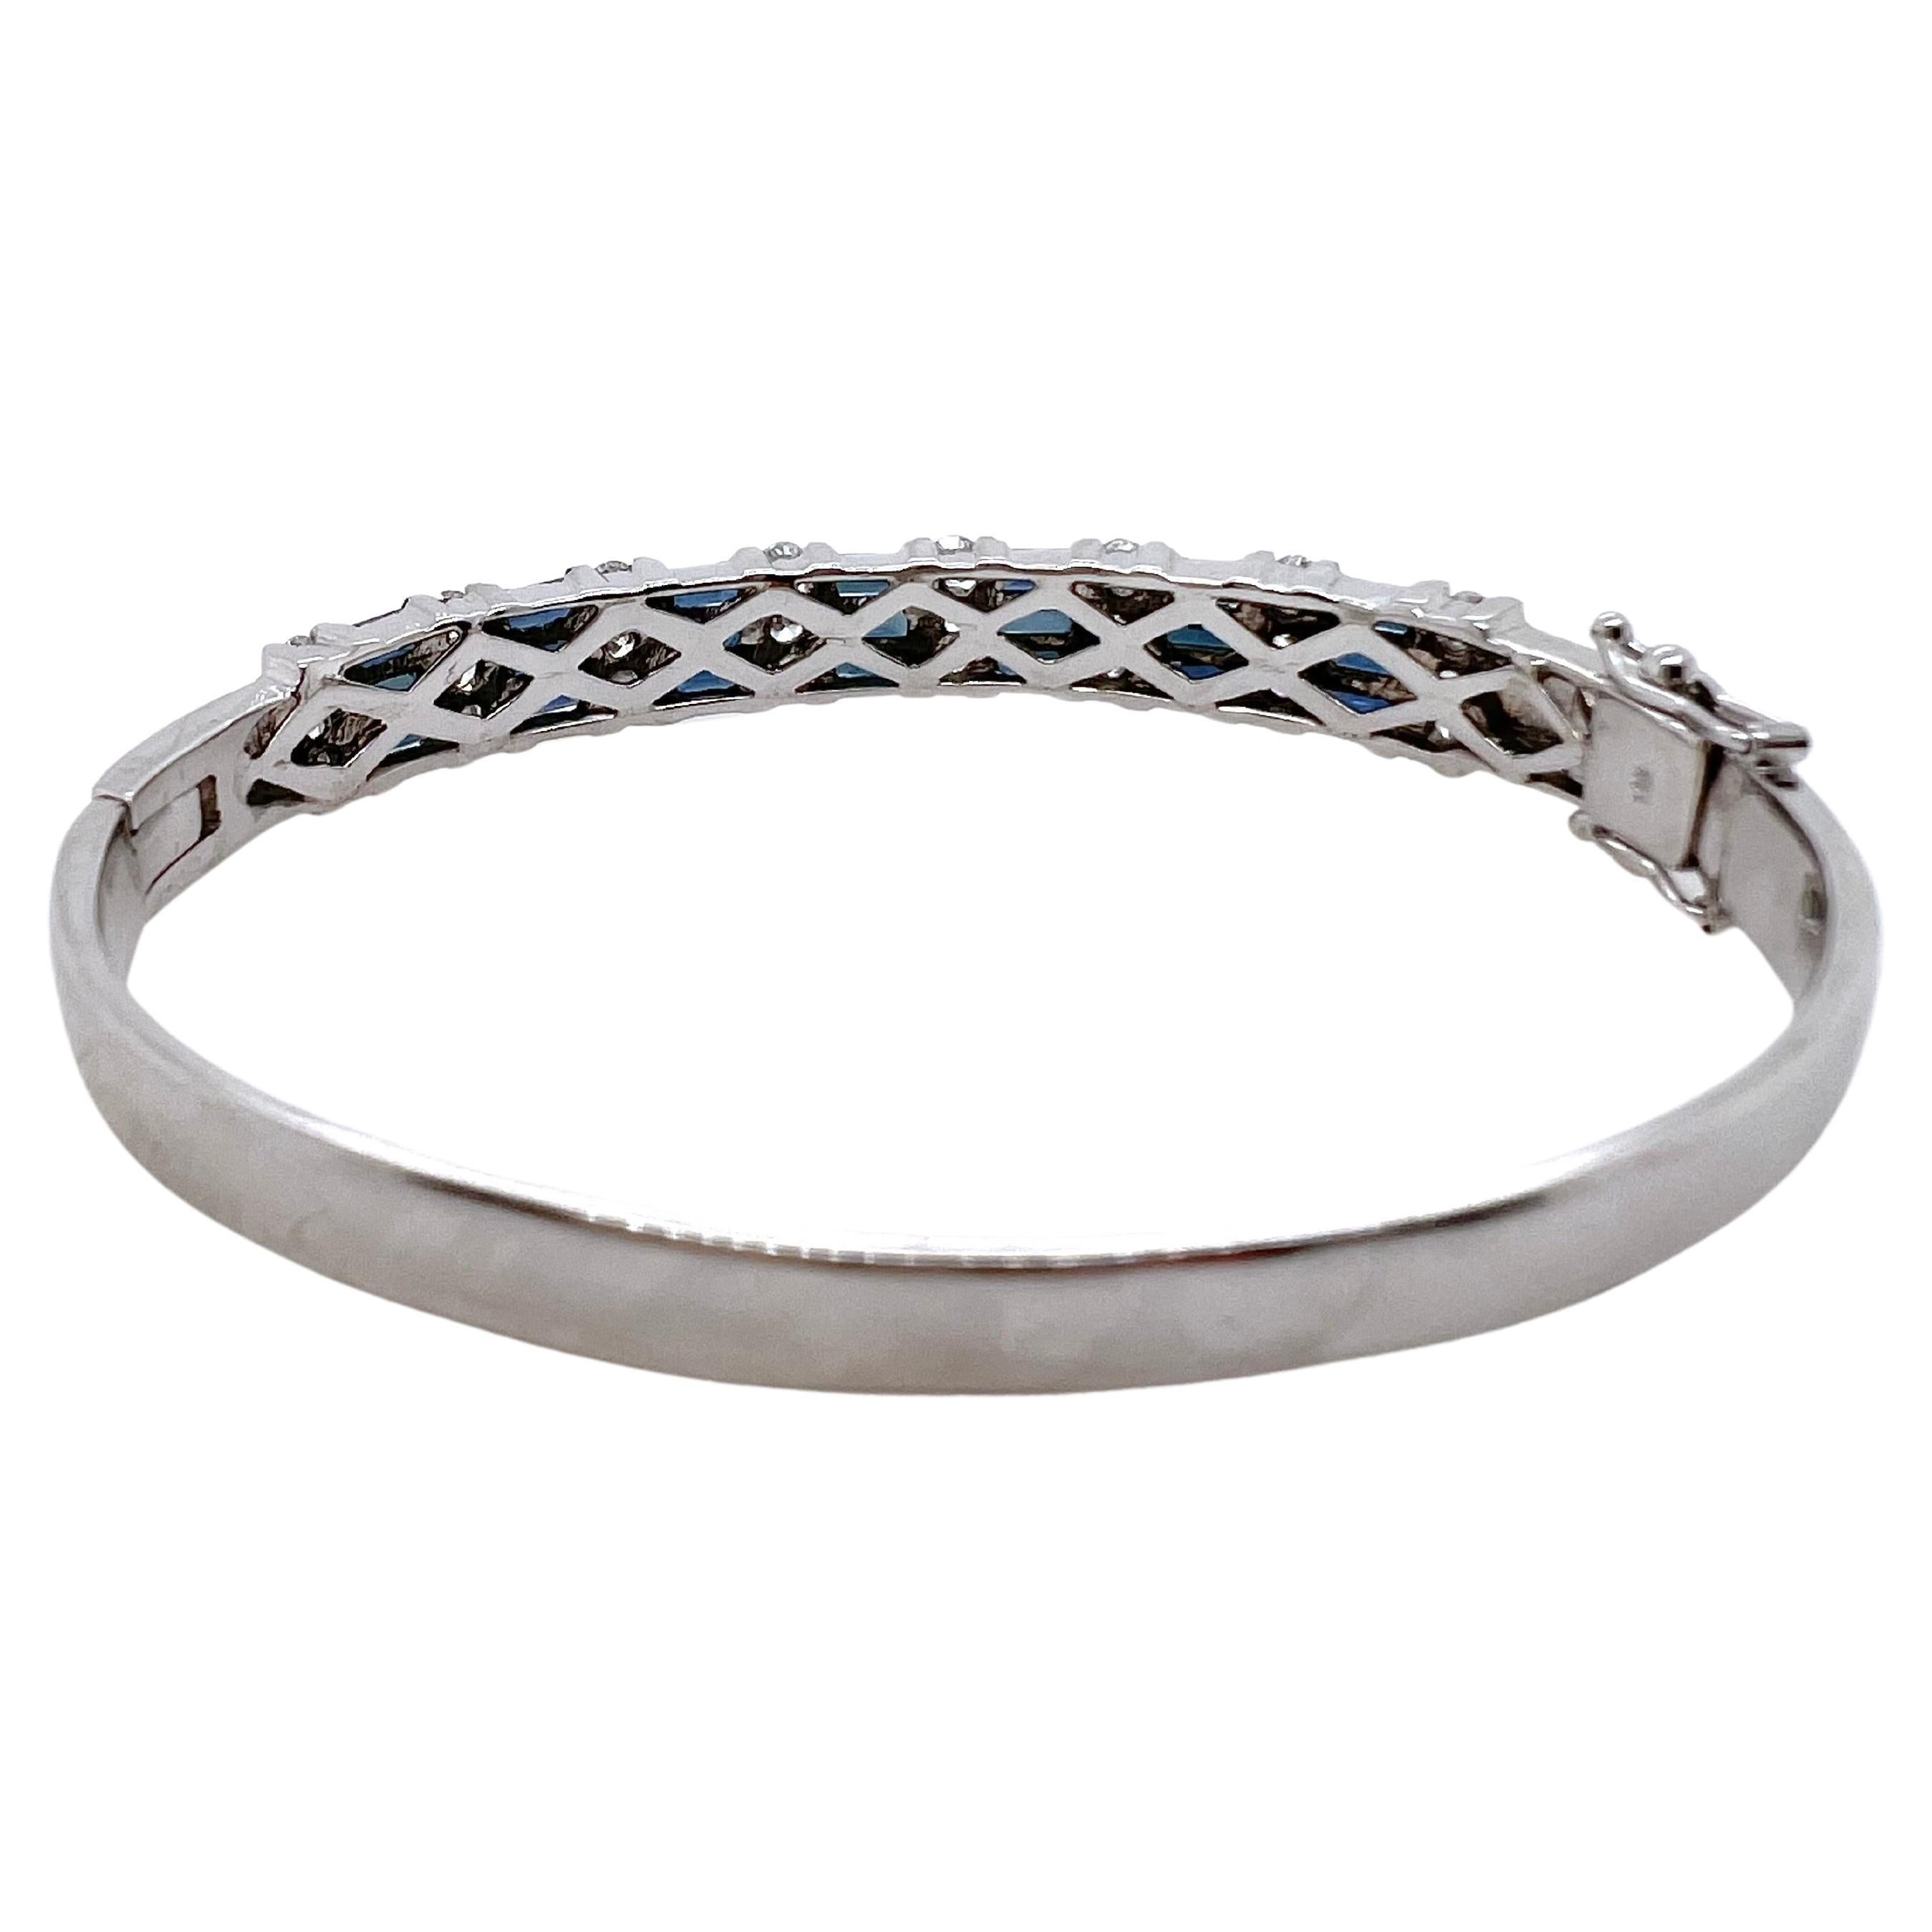 This iconic bangle is made in 14k white gold and has sapphire baguettes channeled set along with round diamonds channeled set.  Each section has 3 sapphire baguettes followed by 3 diamonds which makes it symmetrical.  It is perfect for smart casual